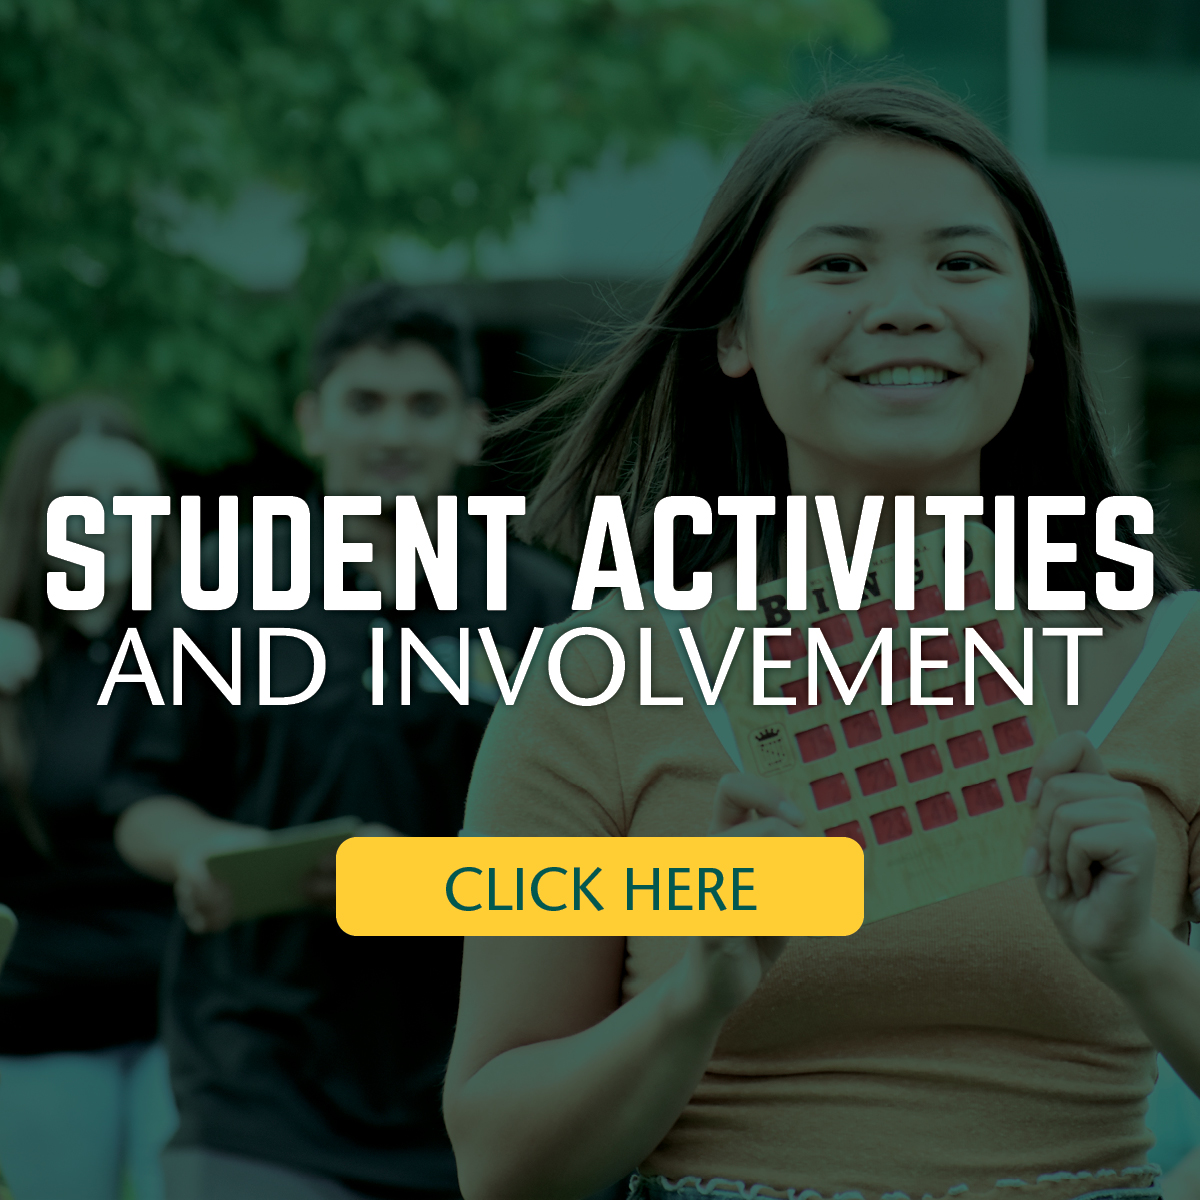 Student activities and involvement